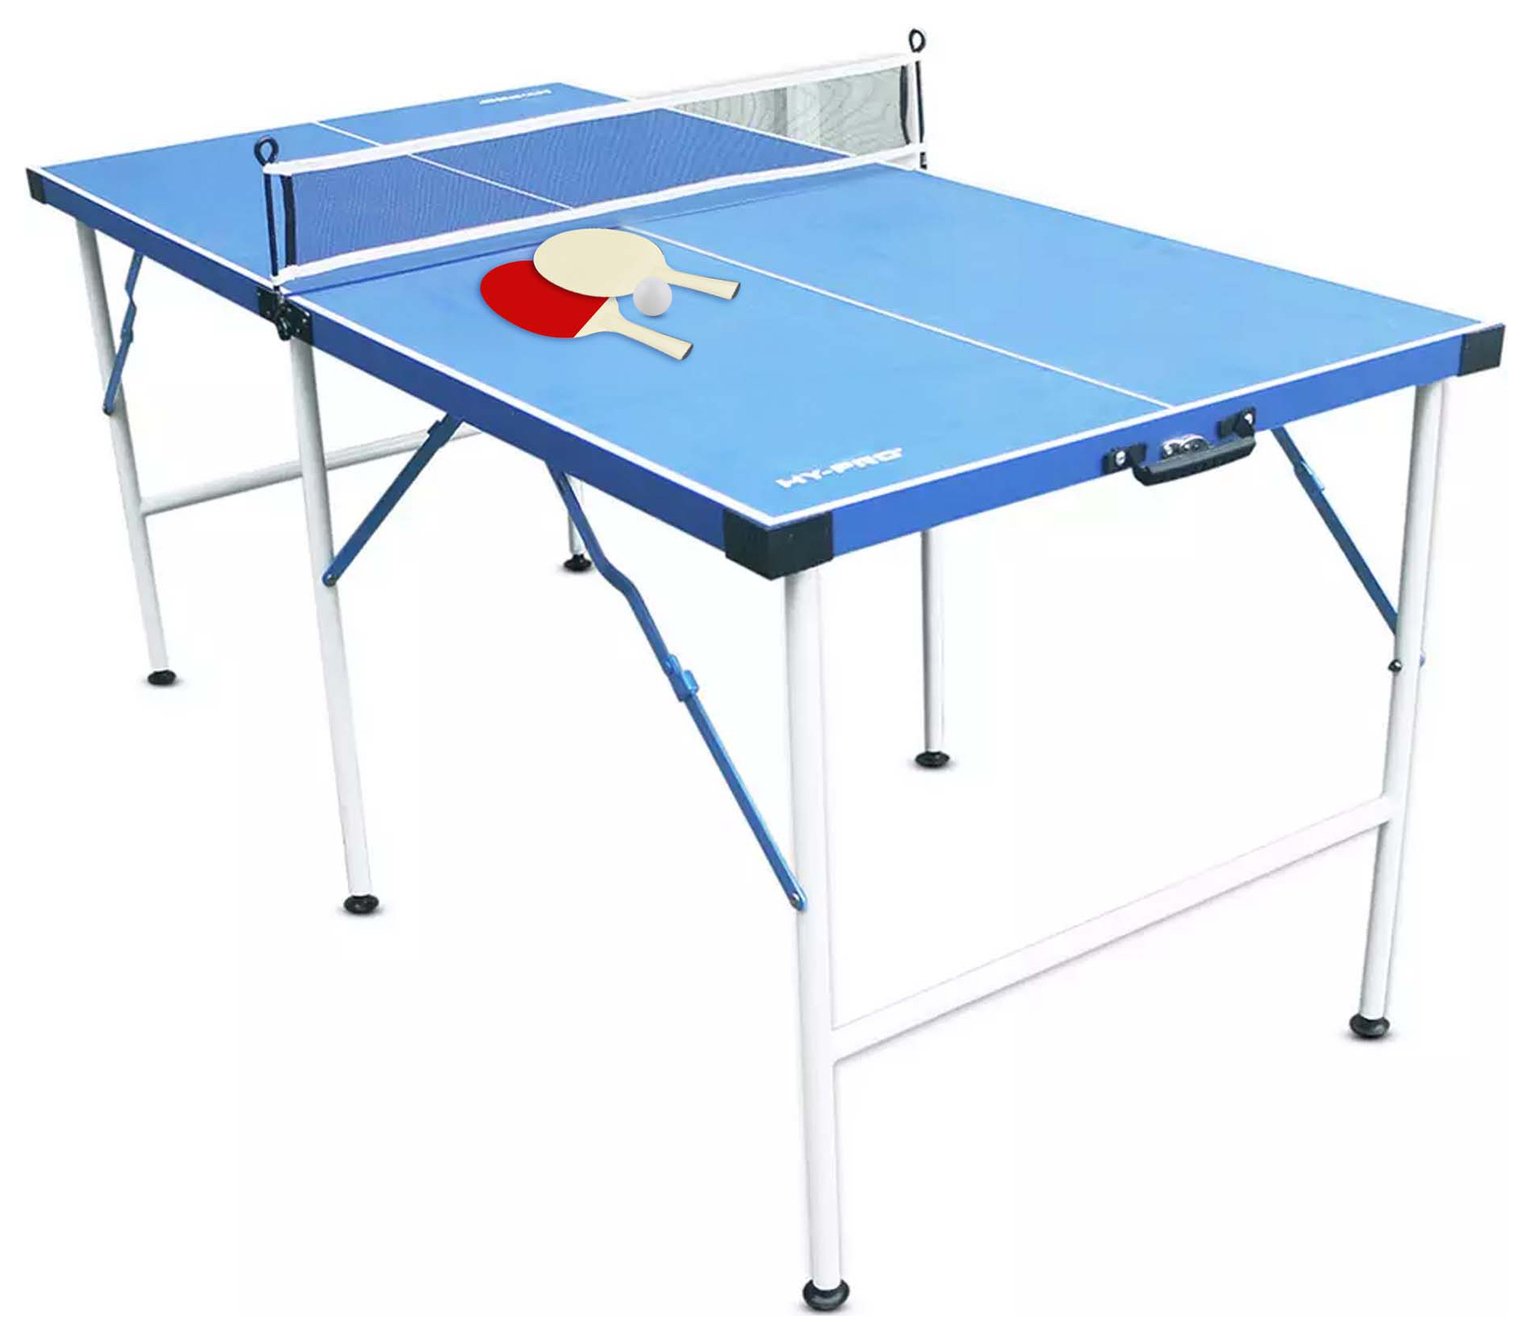 Hy-Pro 5ft Folding Table Tennis Table